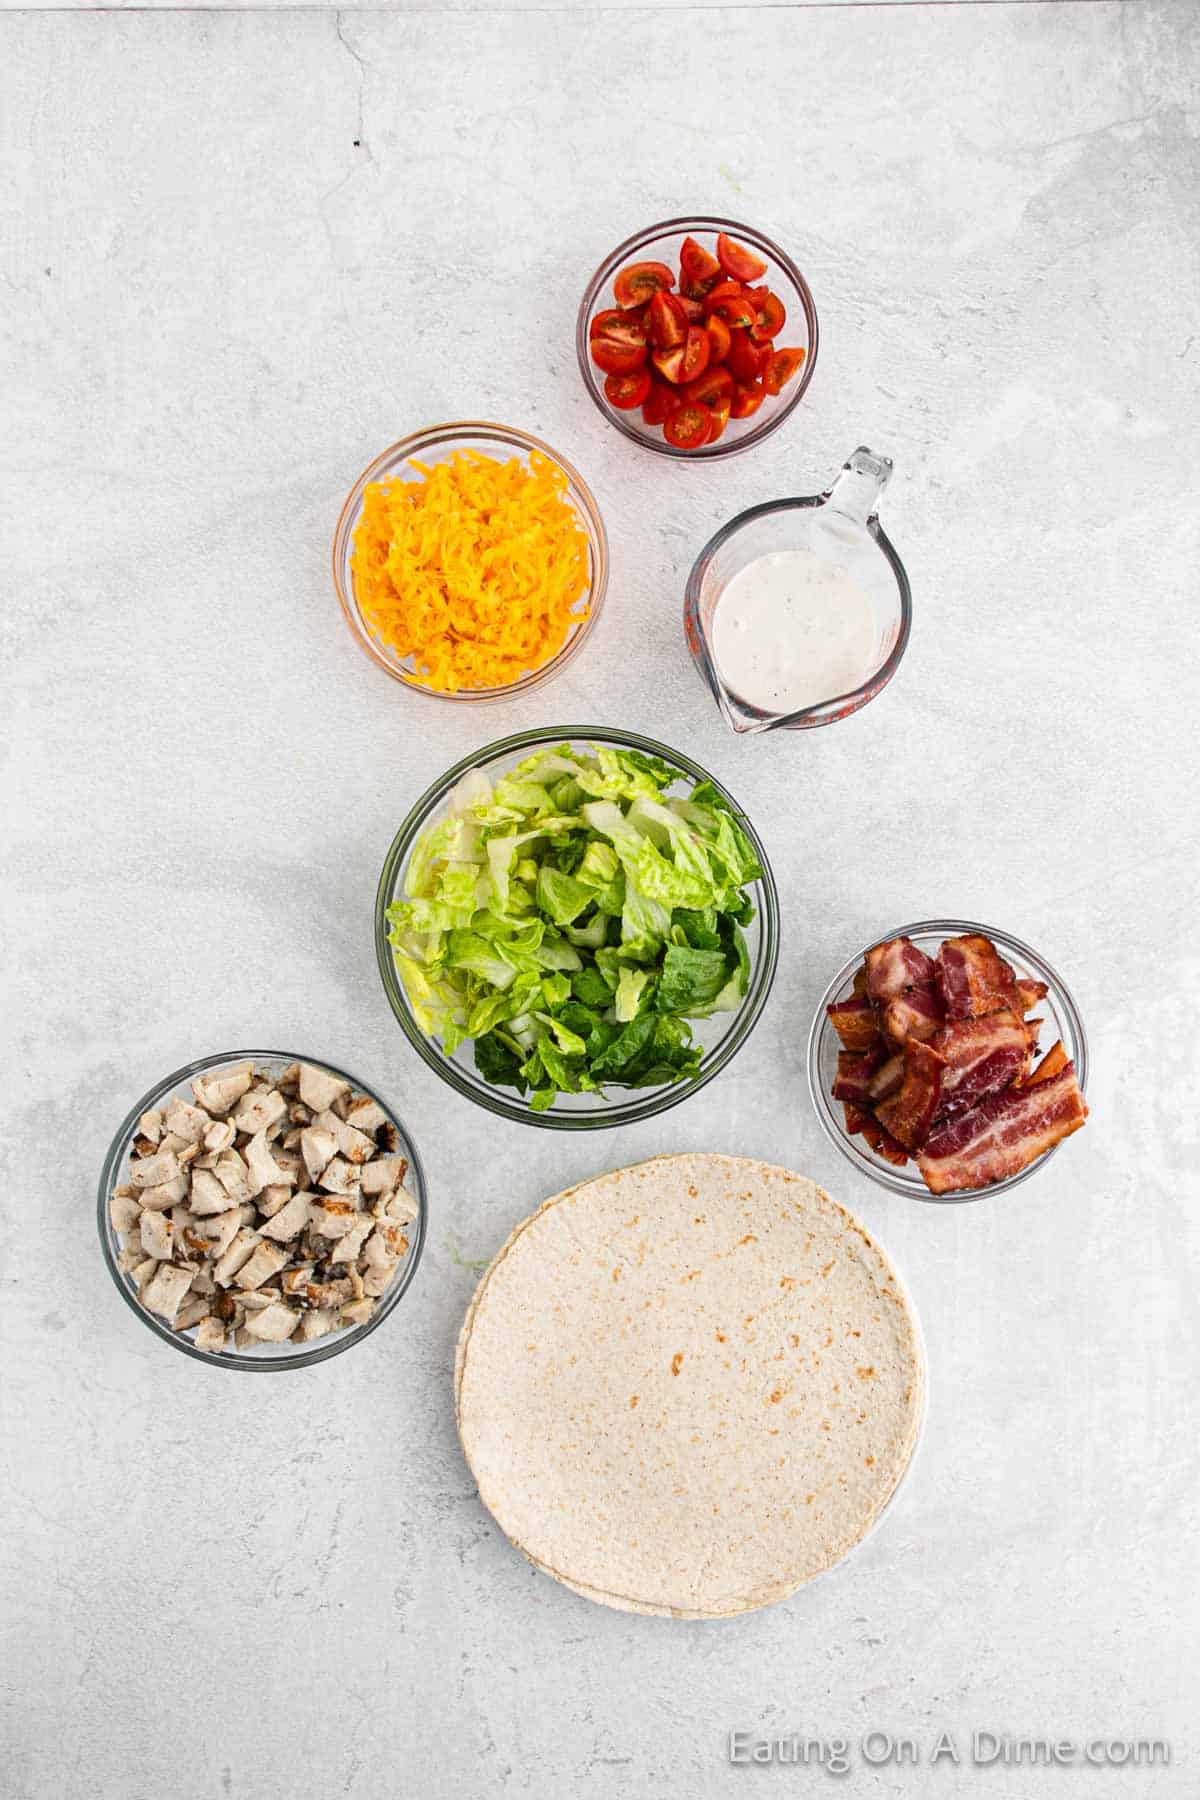 Ingredients - cooked chicken, bacon, ranch dressing, cheese, lettuce, cherry tomatoes, wraps